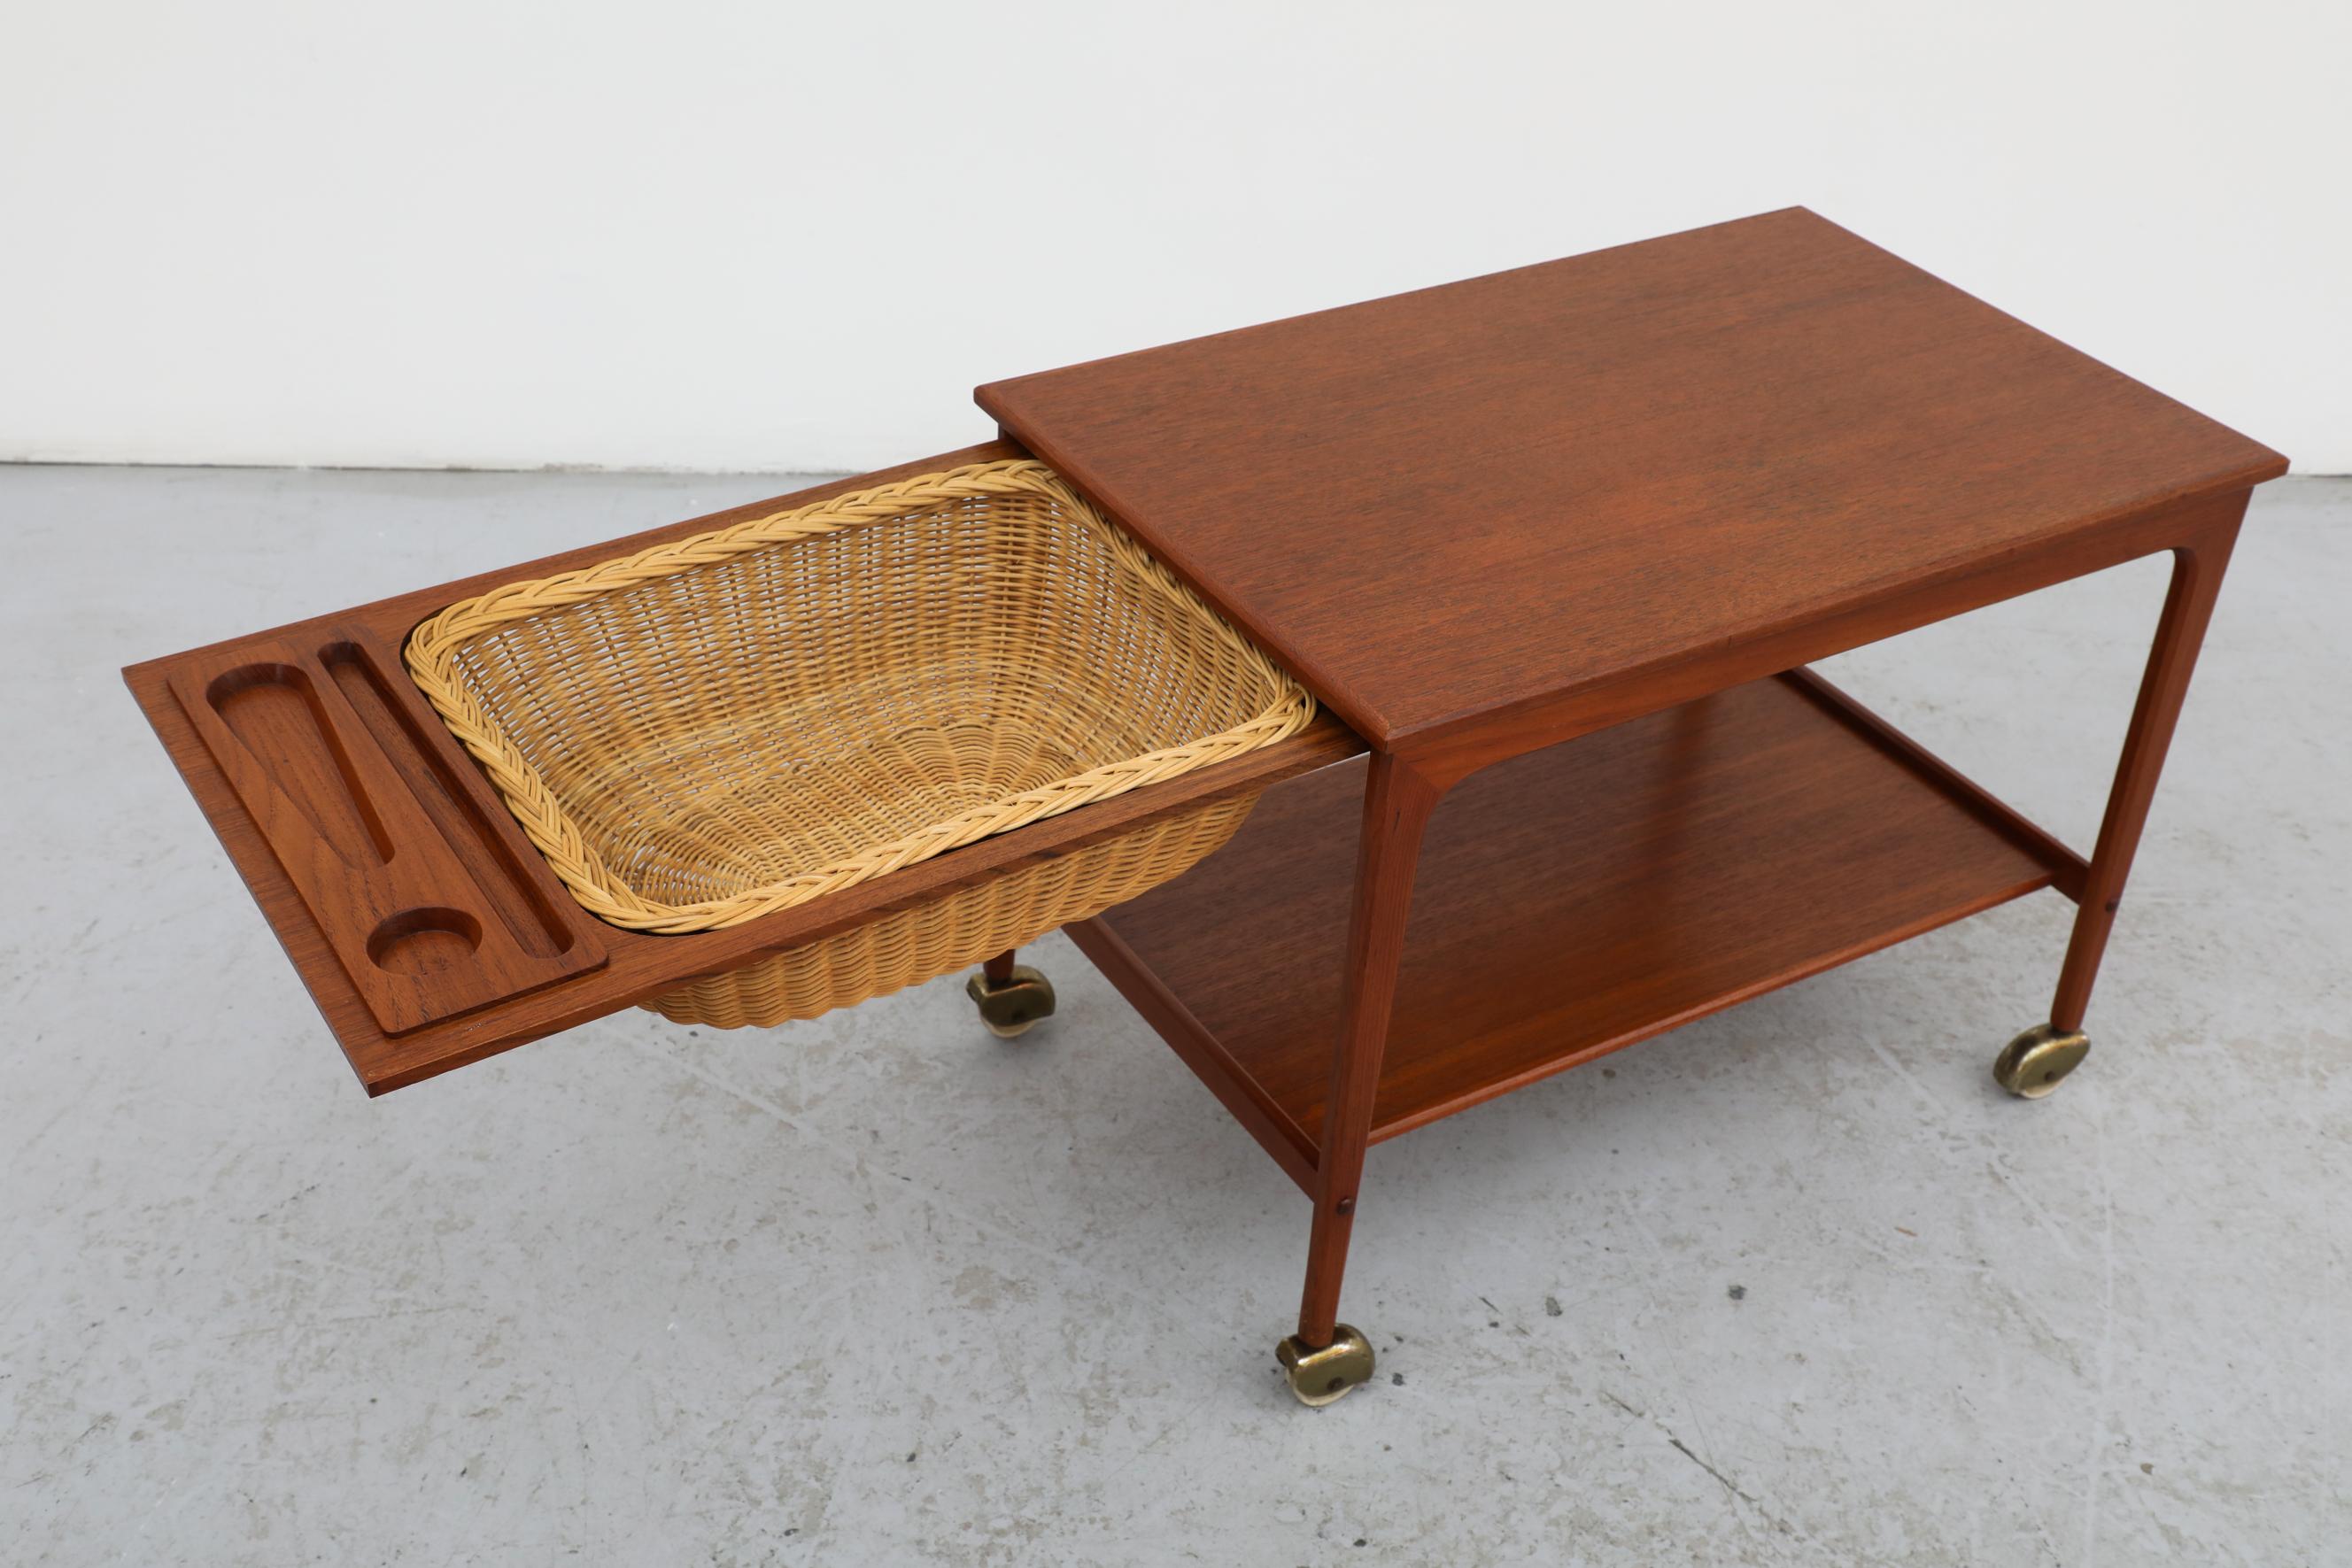 Rolling Danish Teak & Brass Sewing Table or Bar Cart with Slide Out Basket For Sale 8